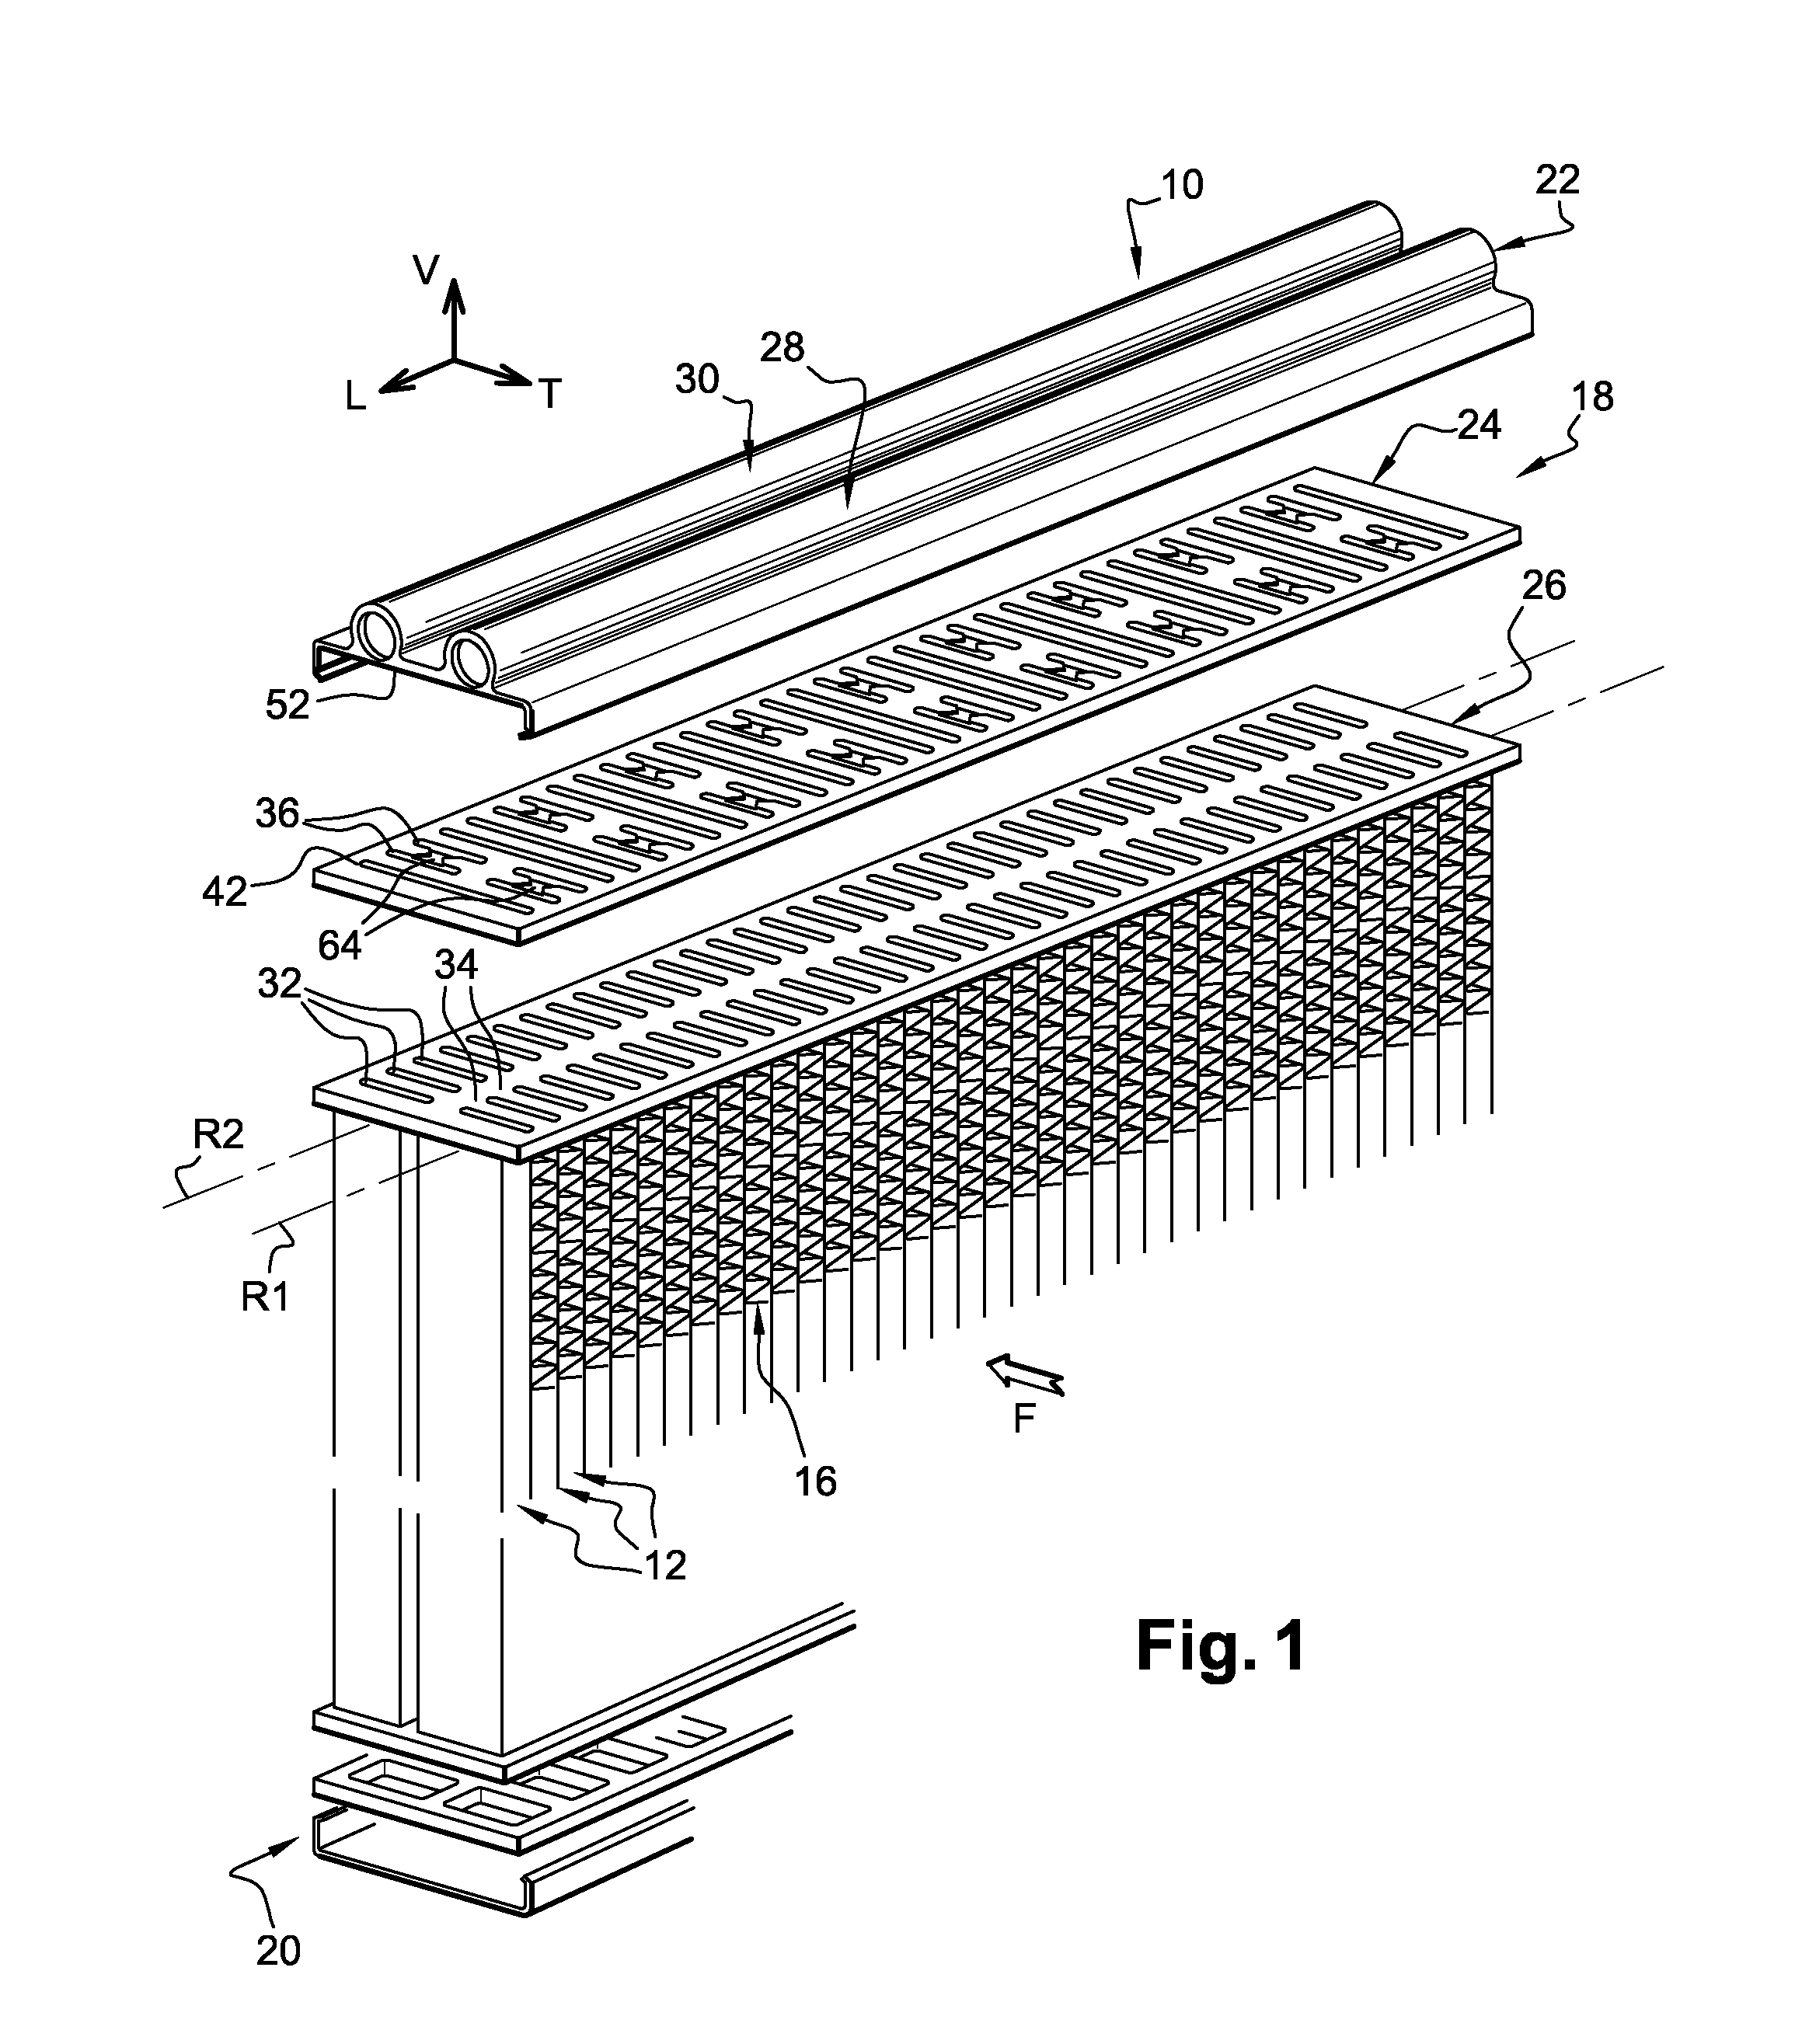 Heat exchanger with a mixing chamber